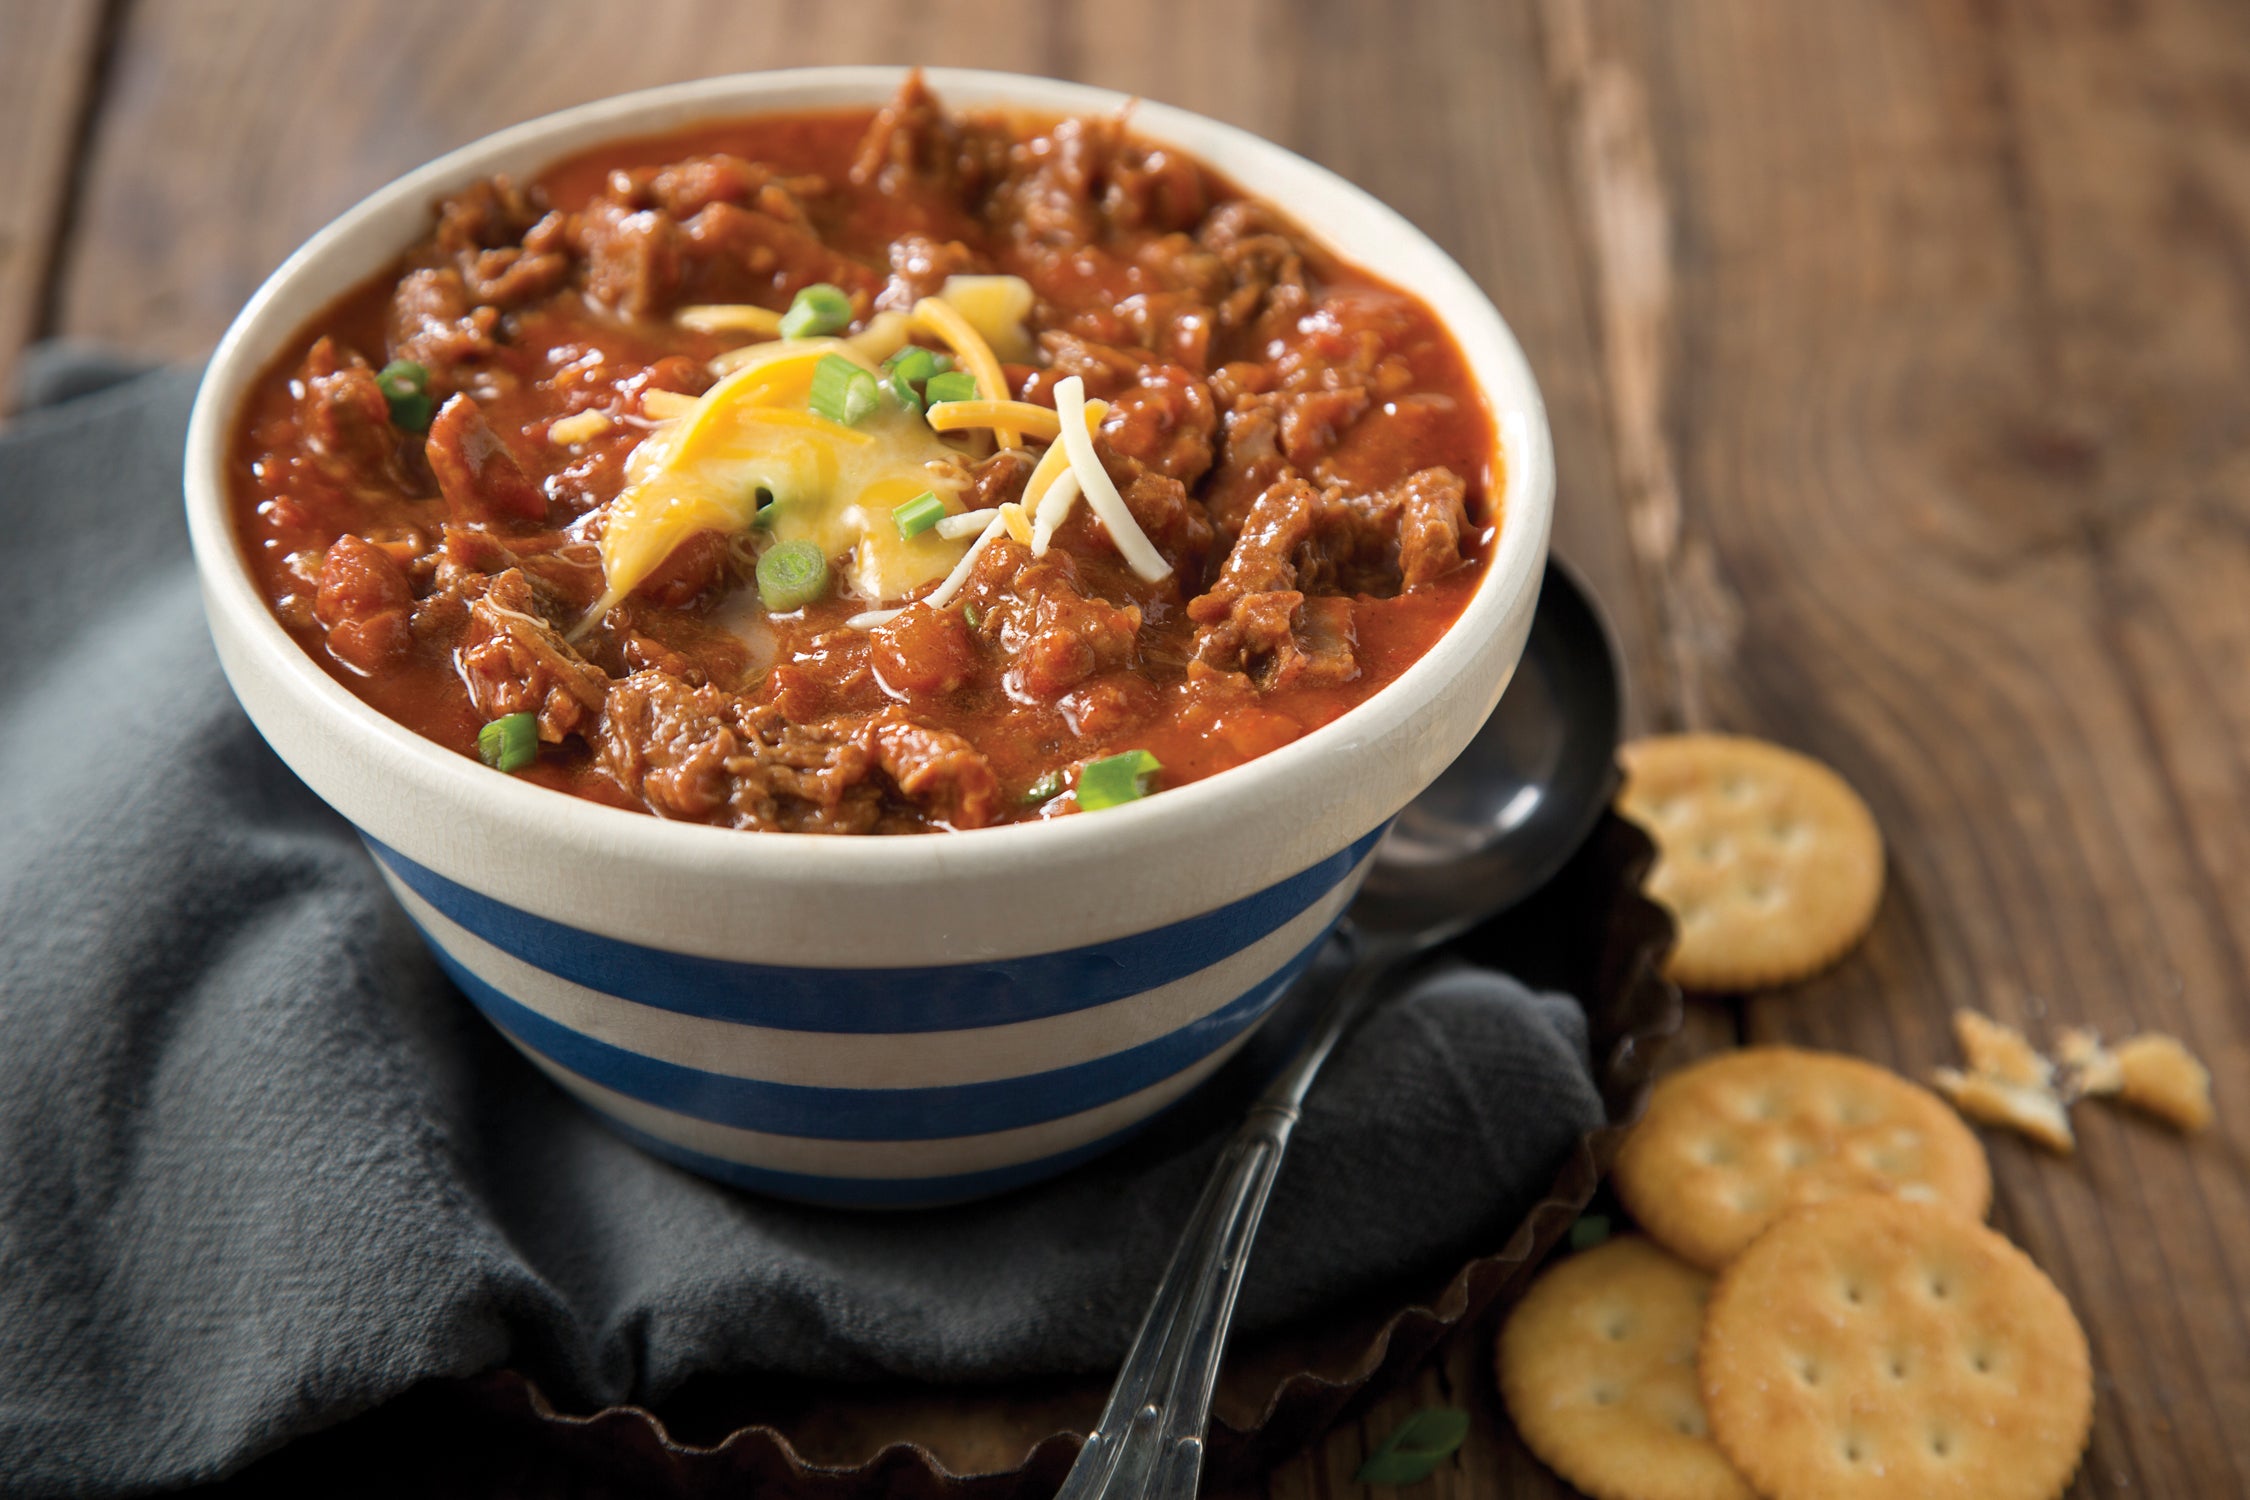 From the cookbook: BBQ Chili